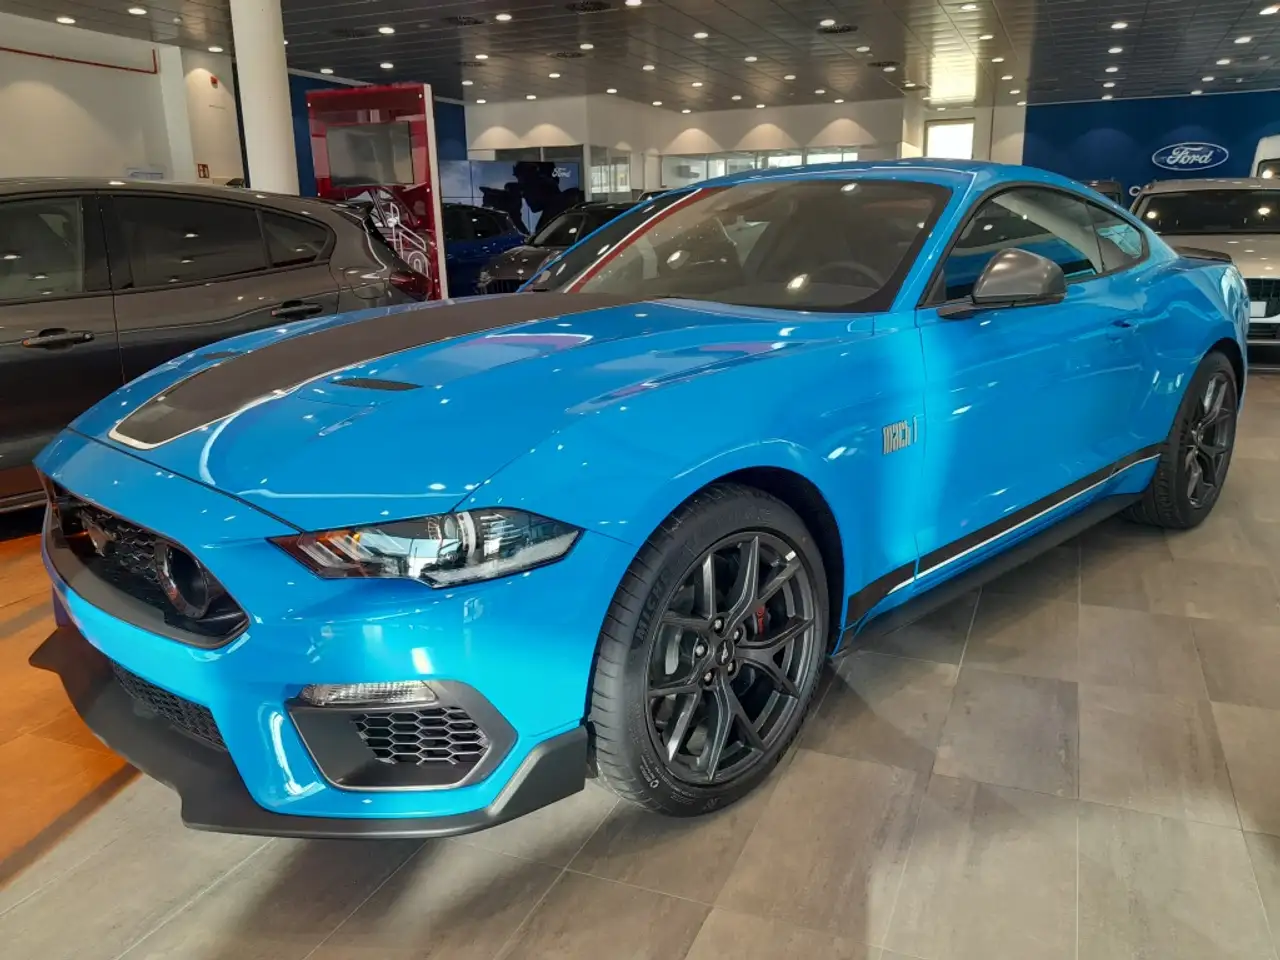 2023 - Ford Mustang Mustang Boîte manuelle Coupé